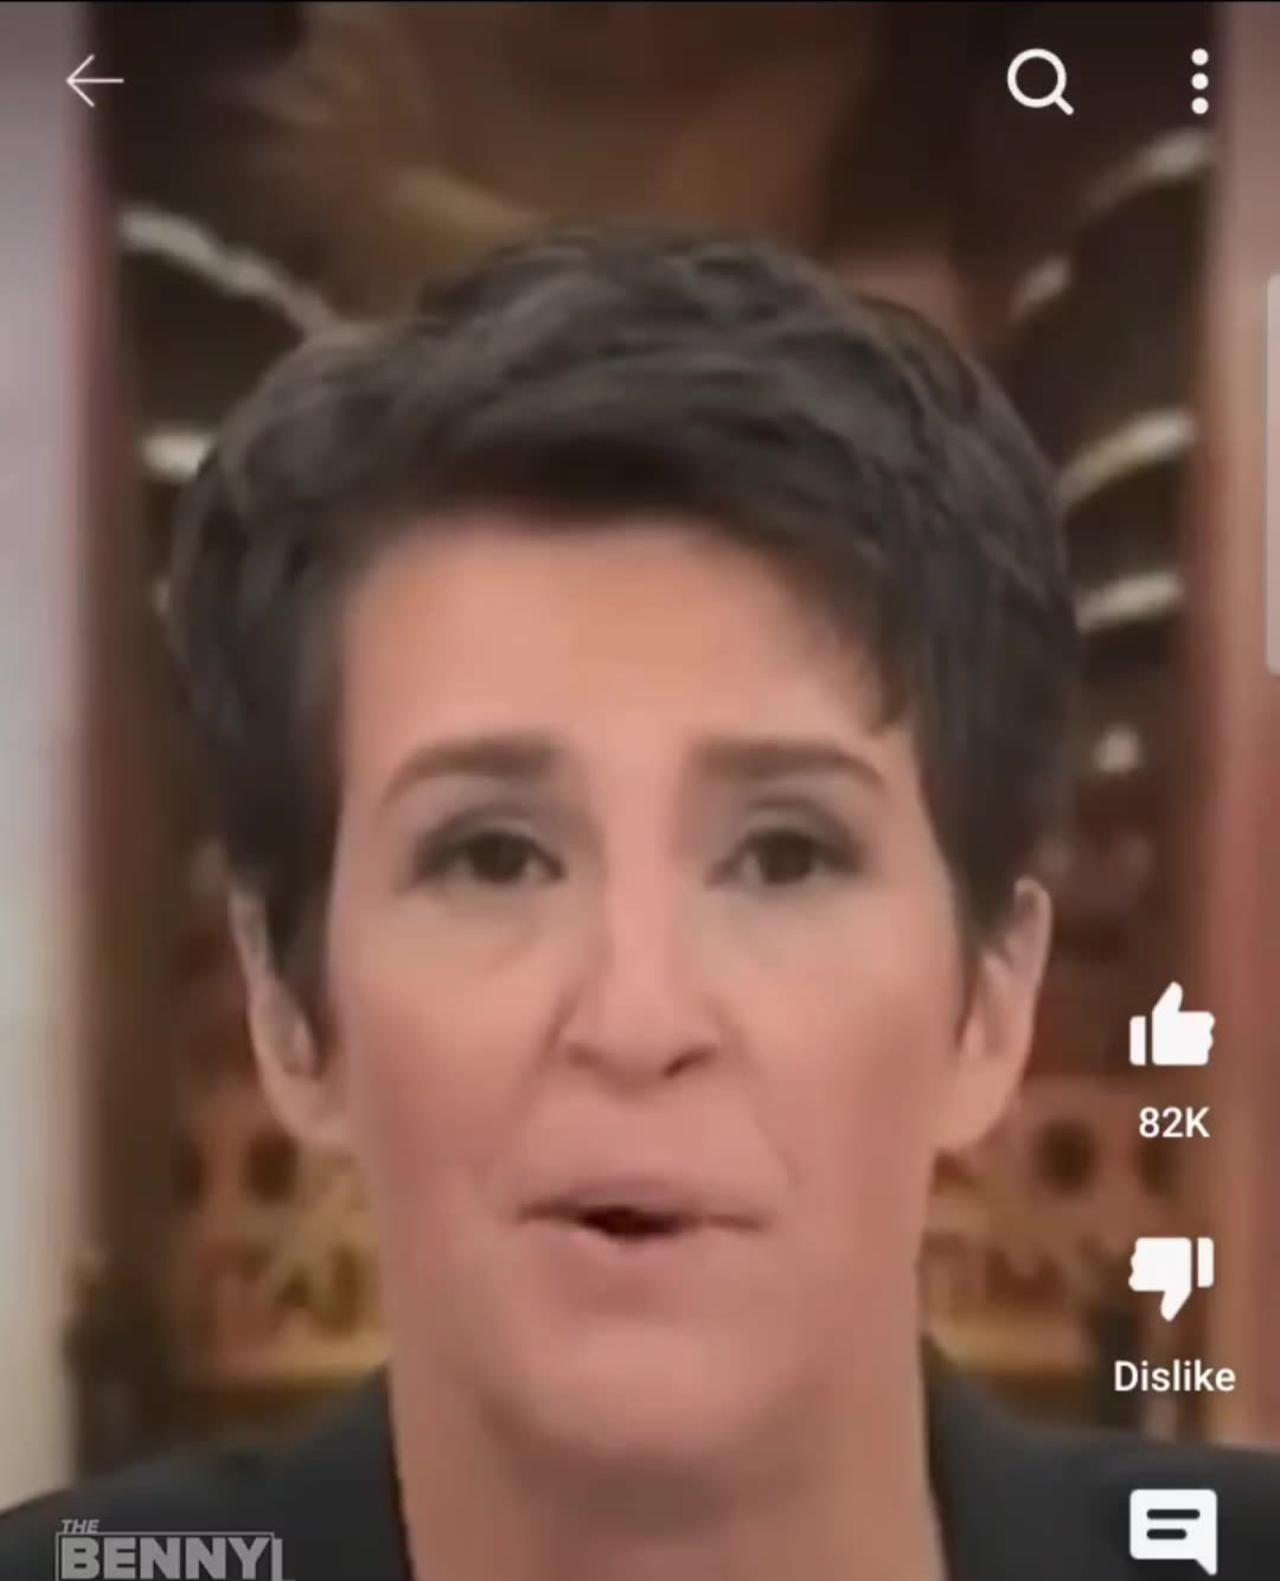 Low IQ Maddow Doesn't Understand that She's Describing Democrats